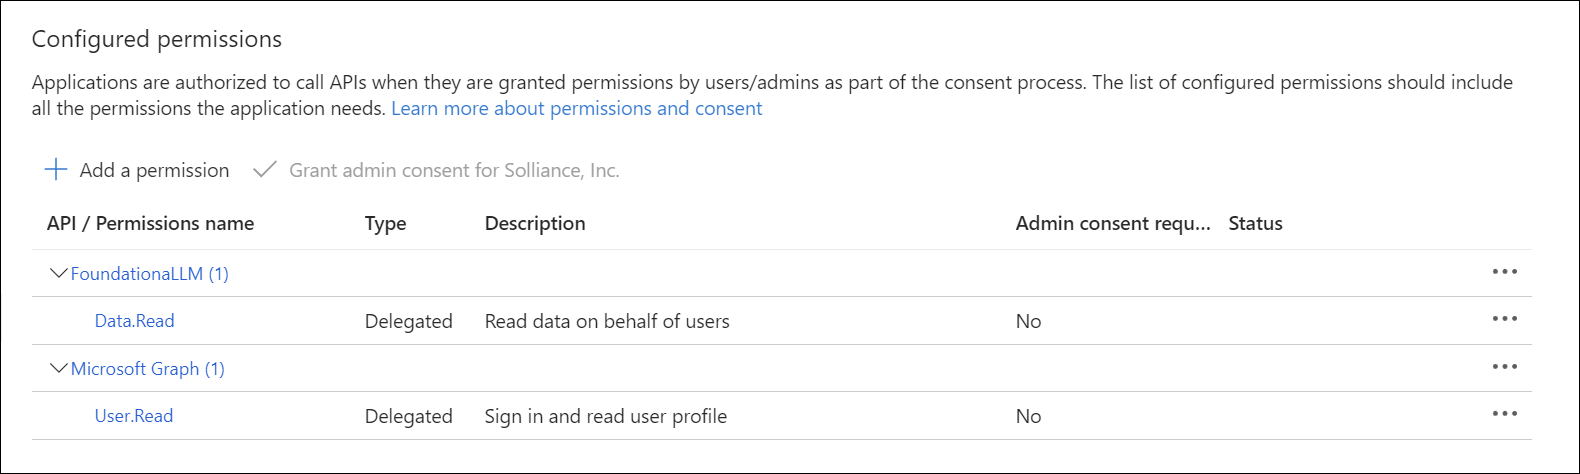 The client application's configured permissions are displayed.